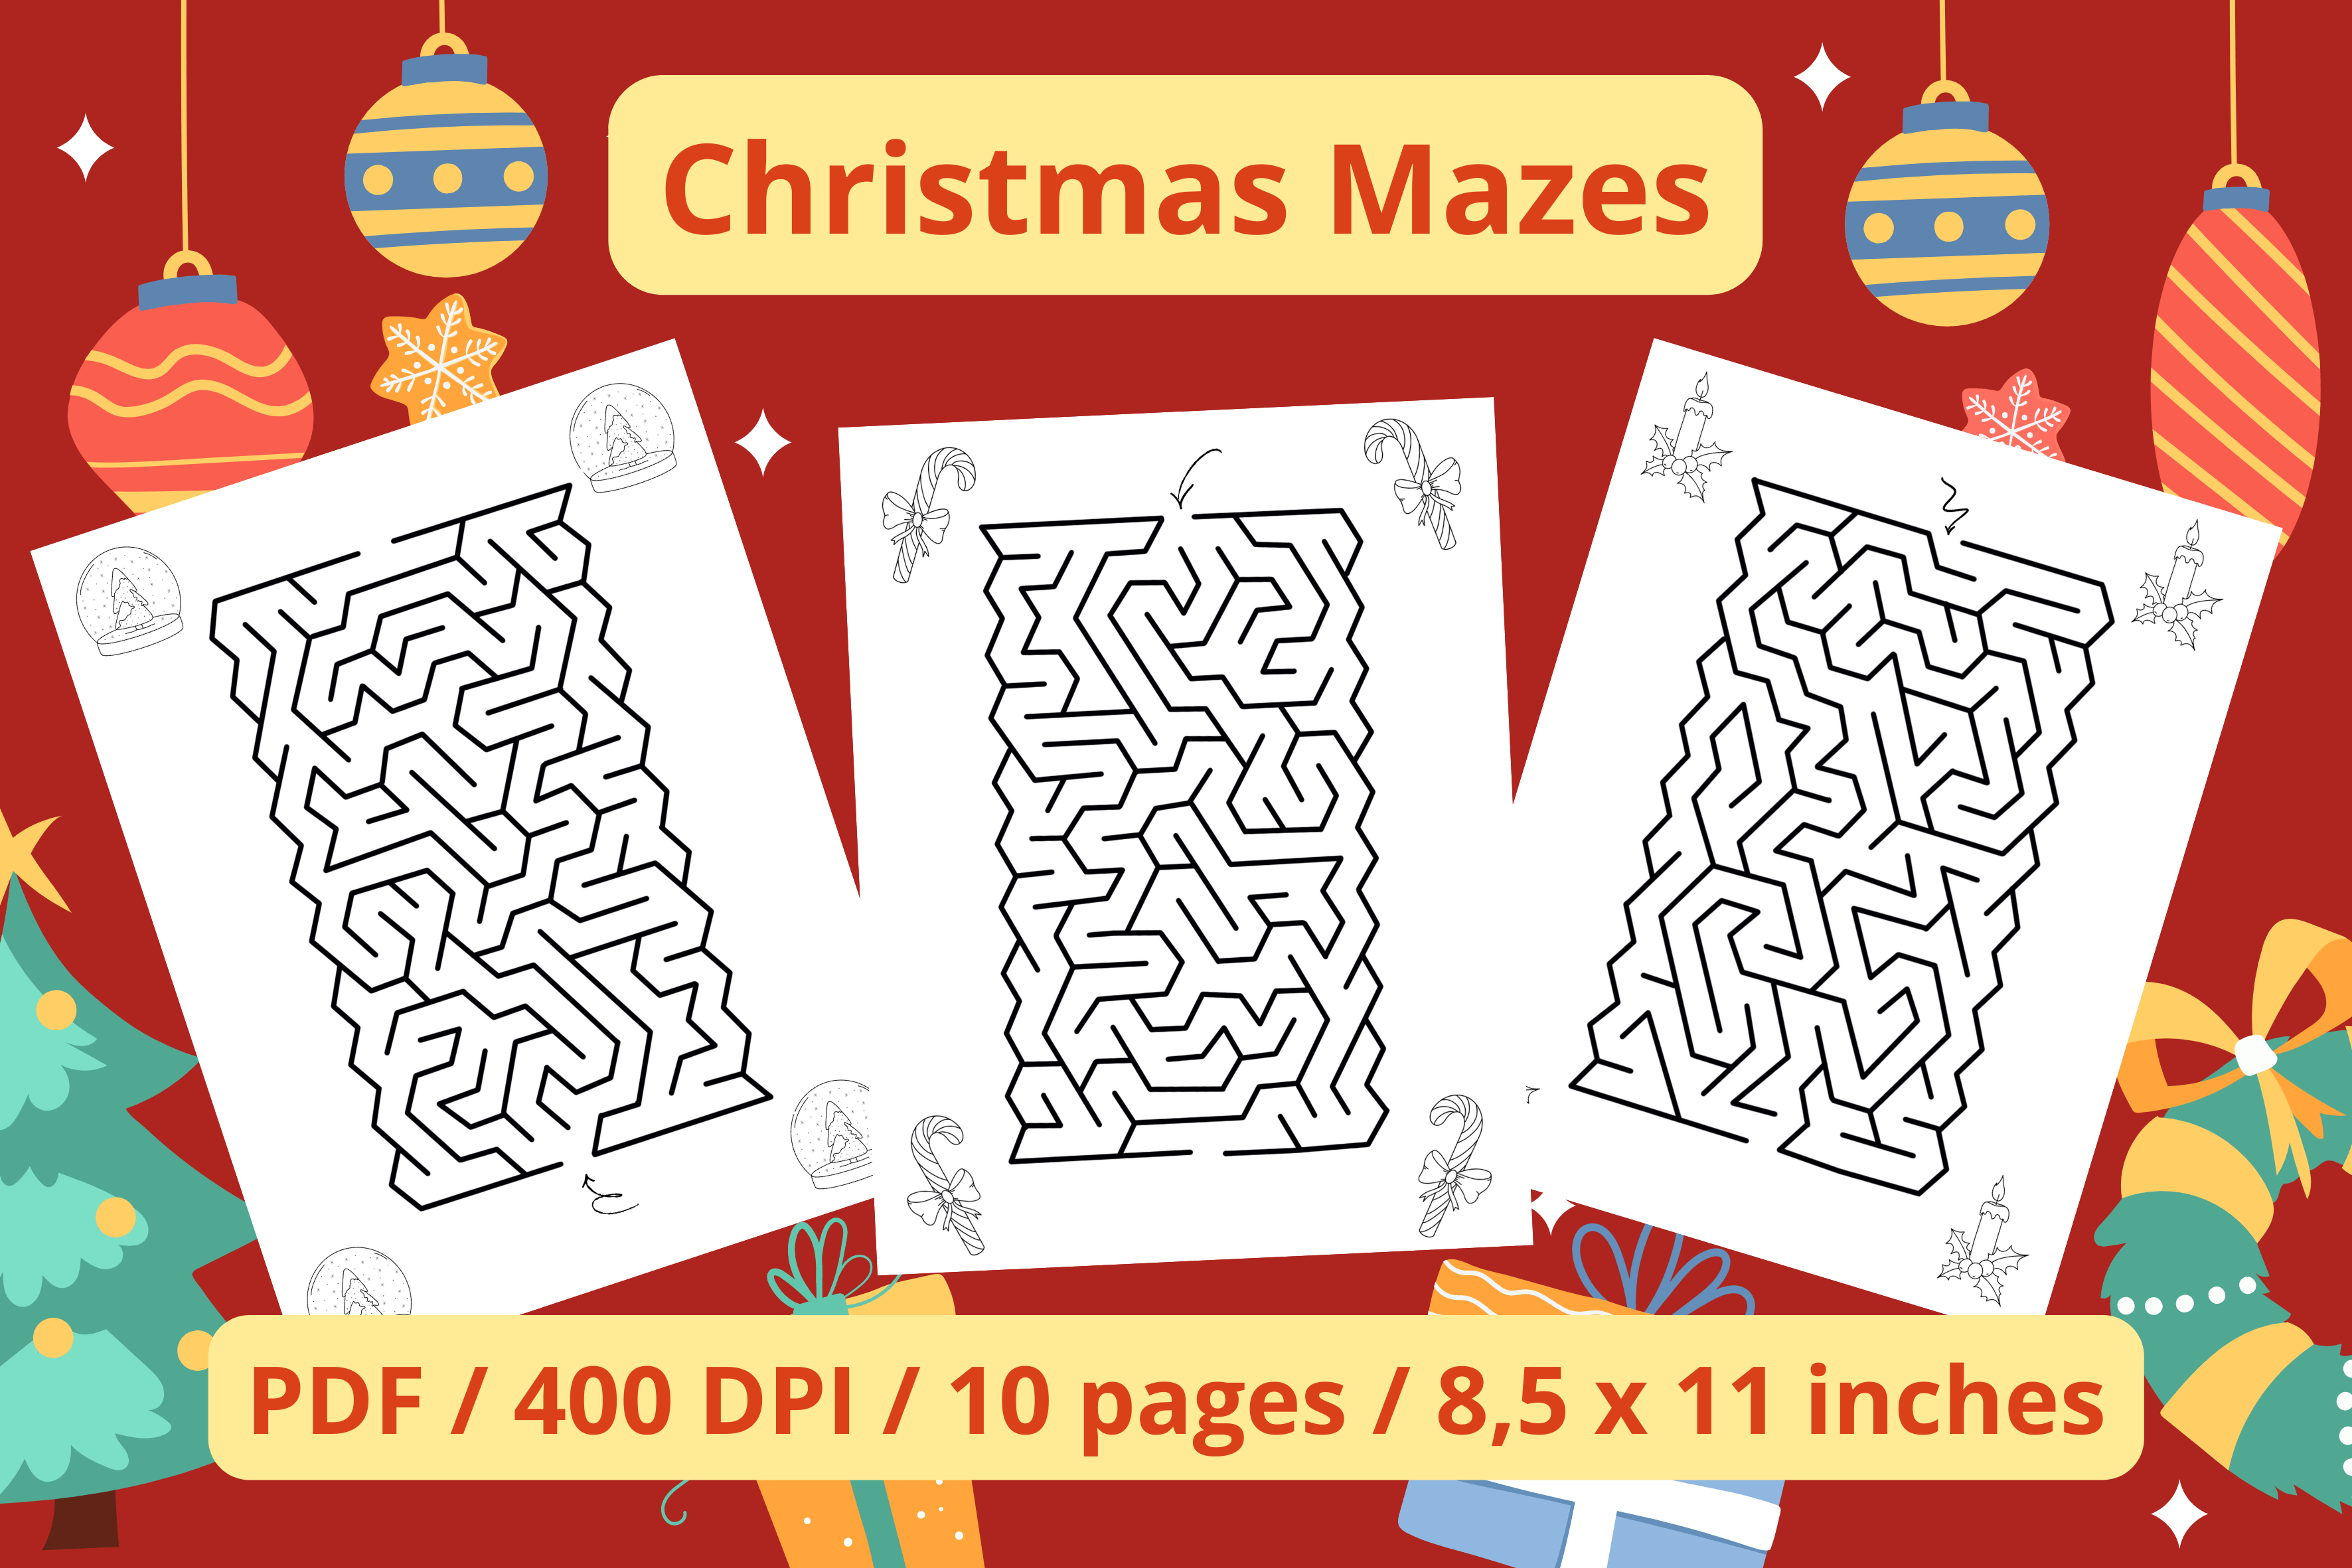 Christmas Mazes Graphic by Golden Moon Design · Creative Fabrica